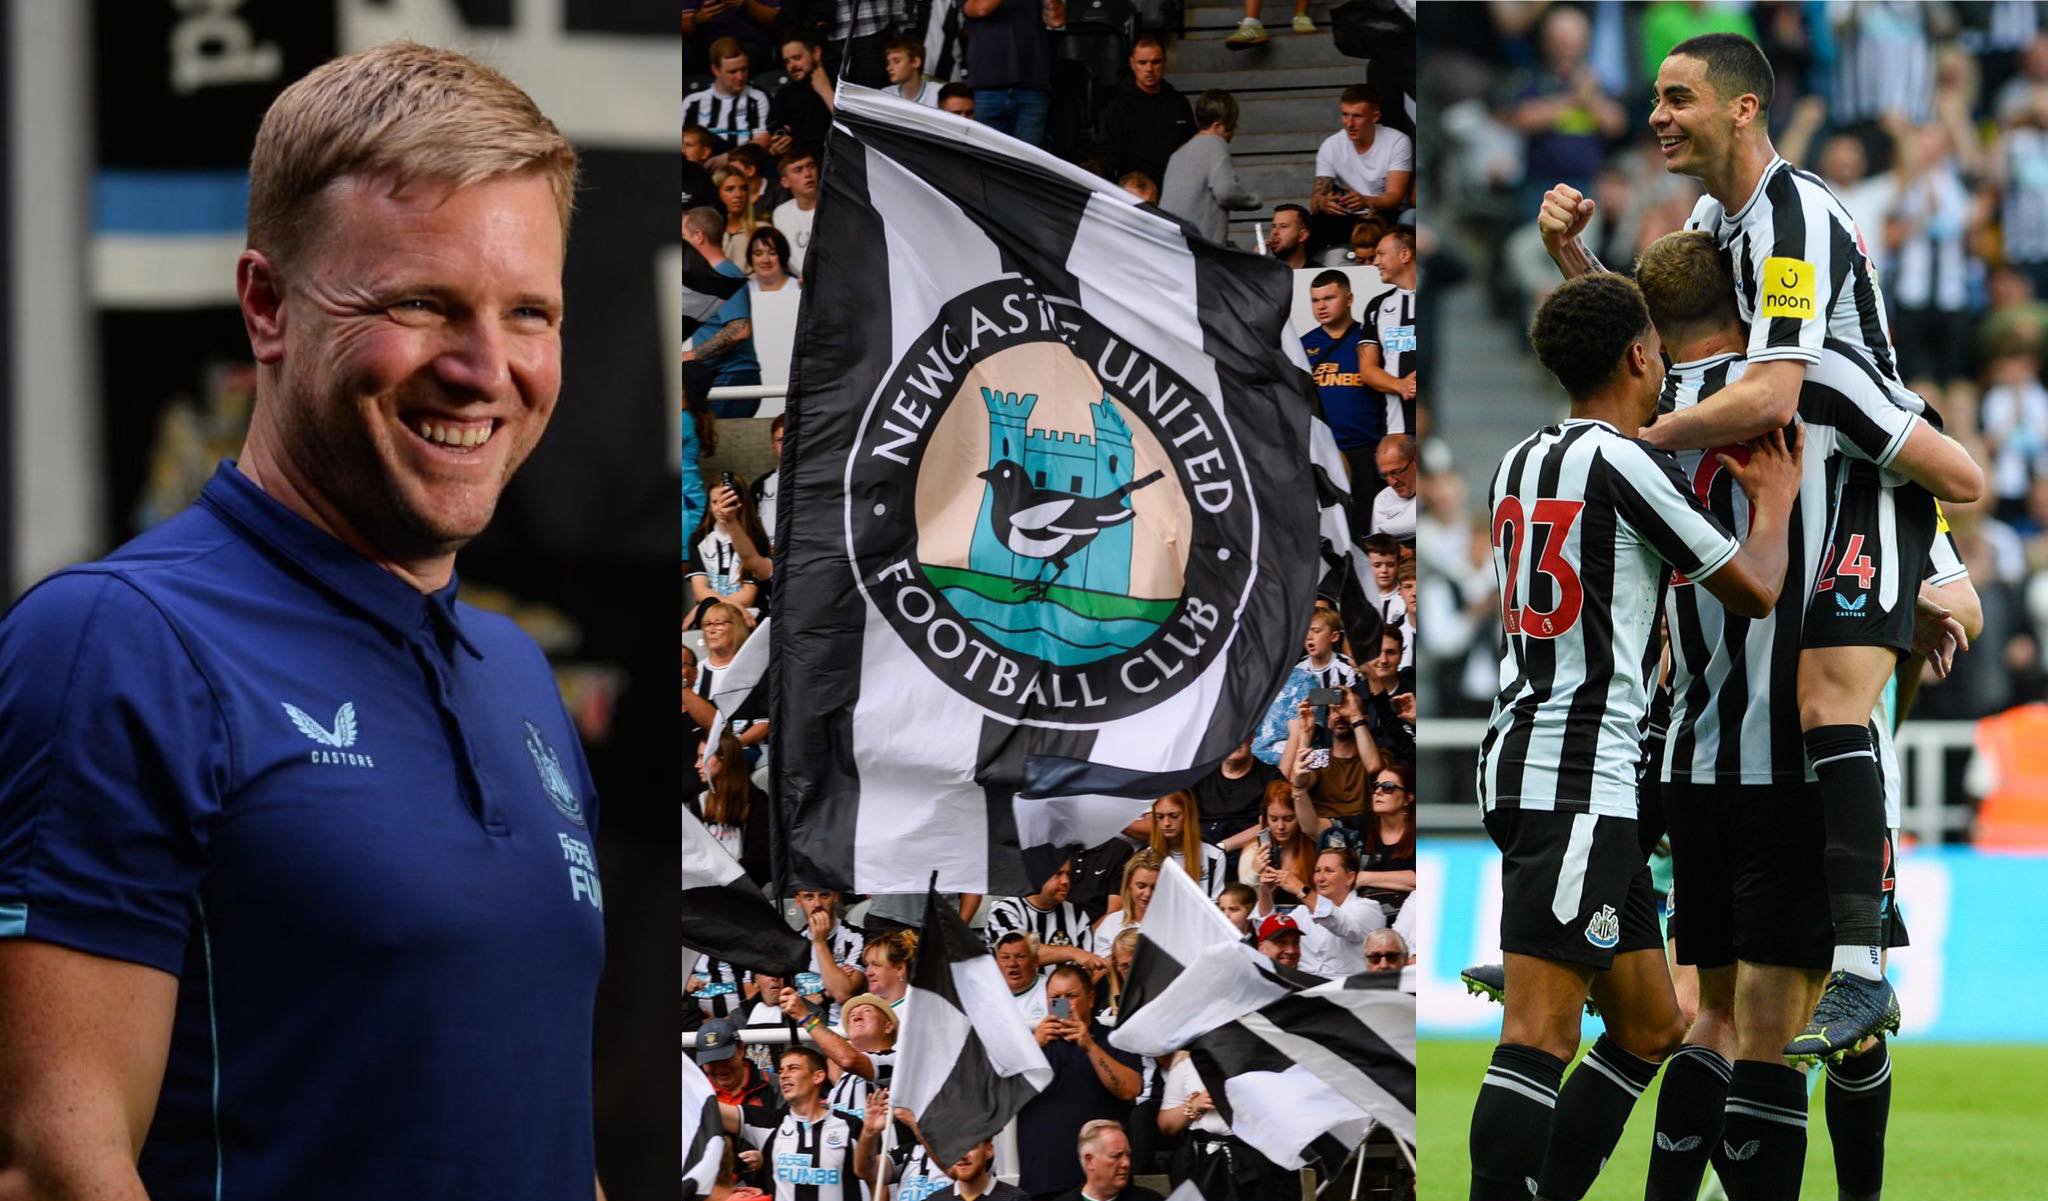 Forget transfer anxiety: 10 reasons I’m so excited for the new season at Newcastle United